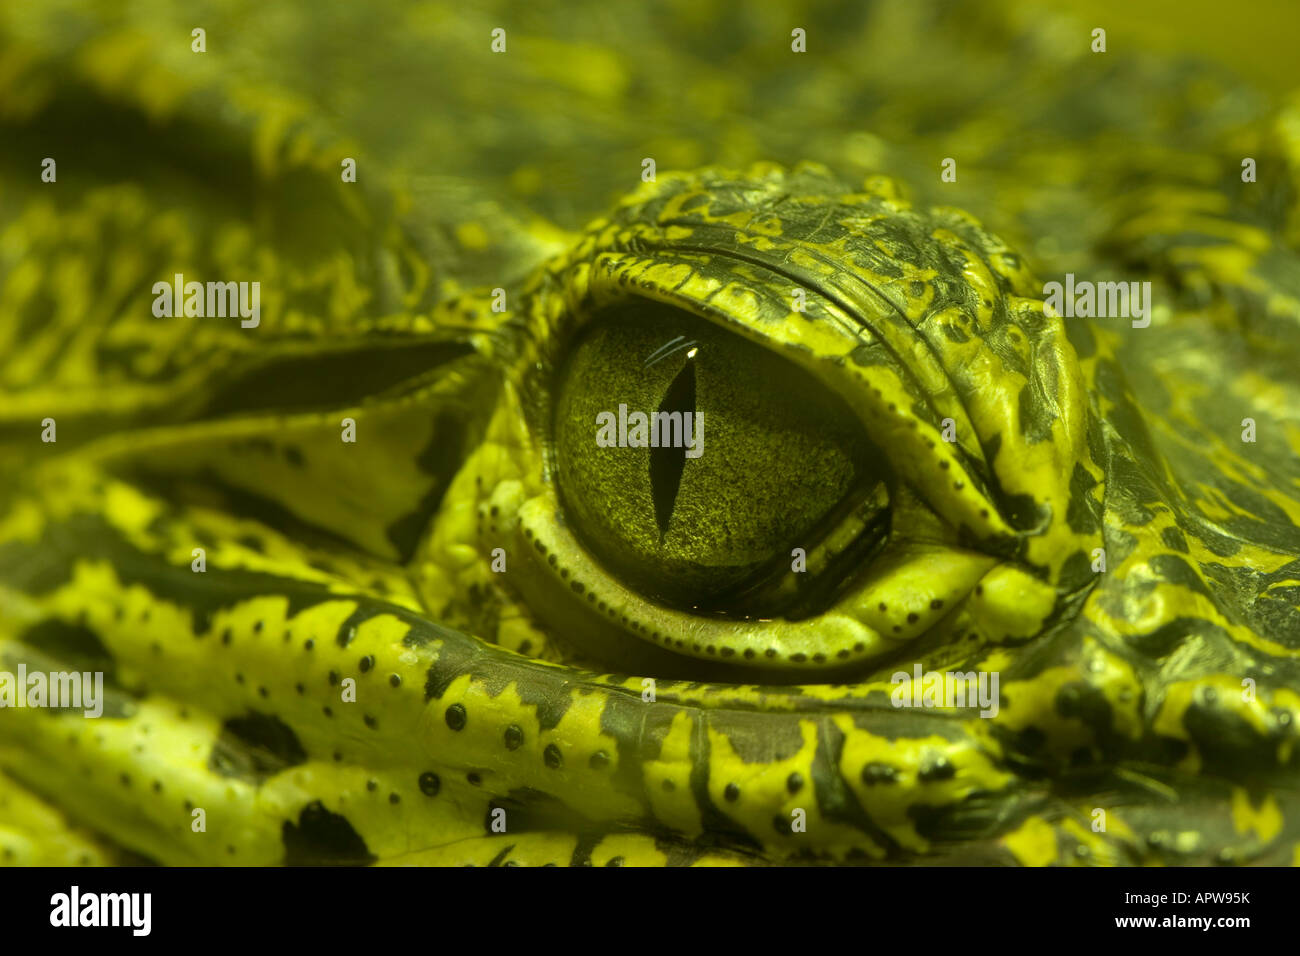 the eye of a green alligator Stock Photo